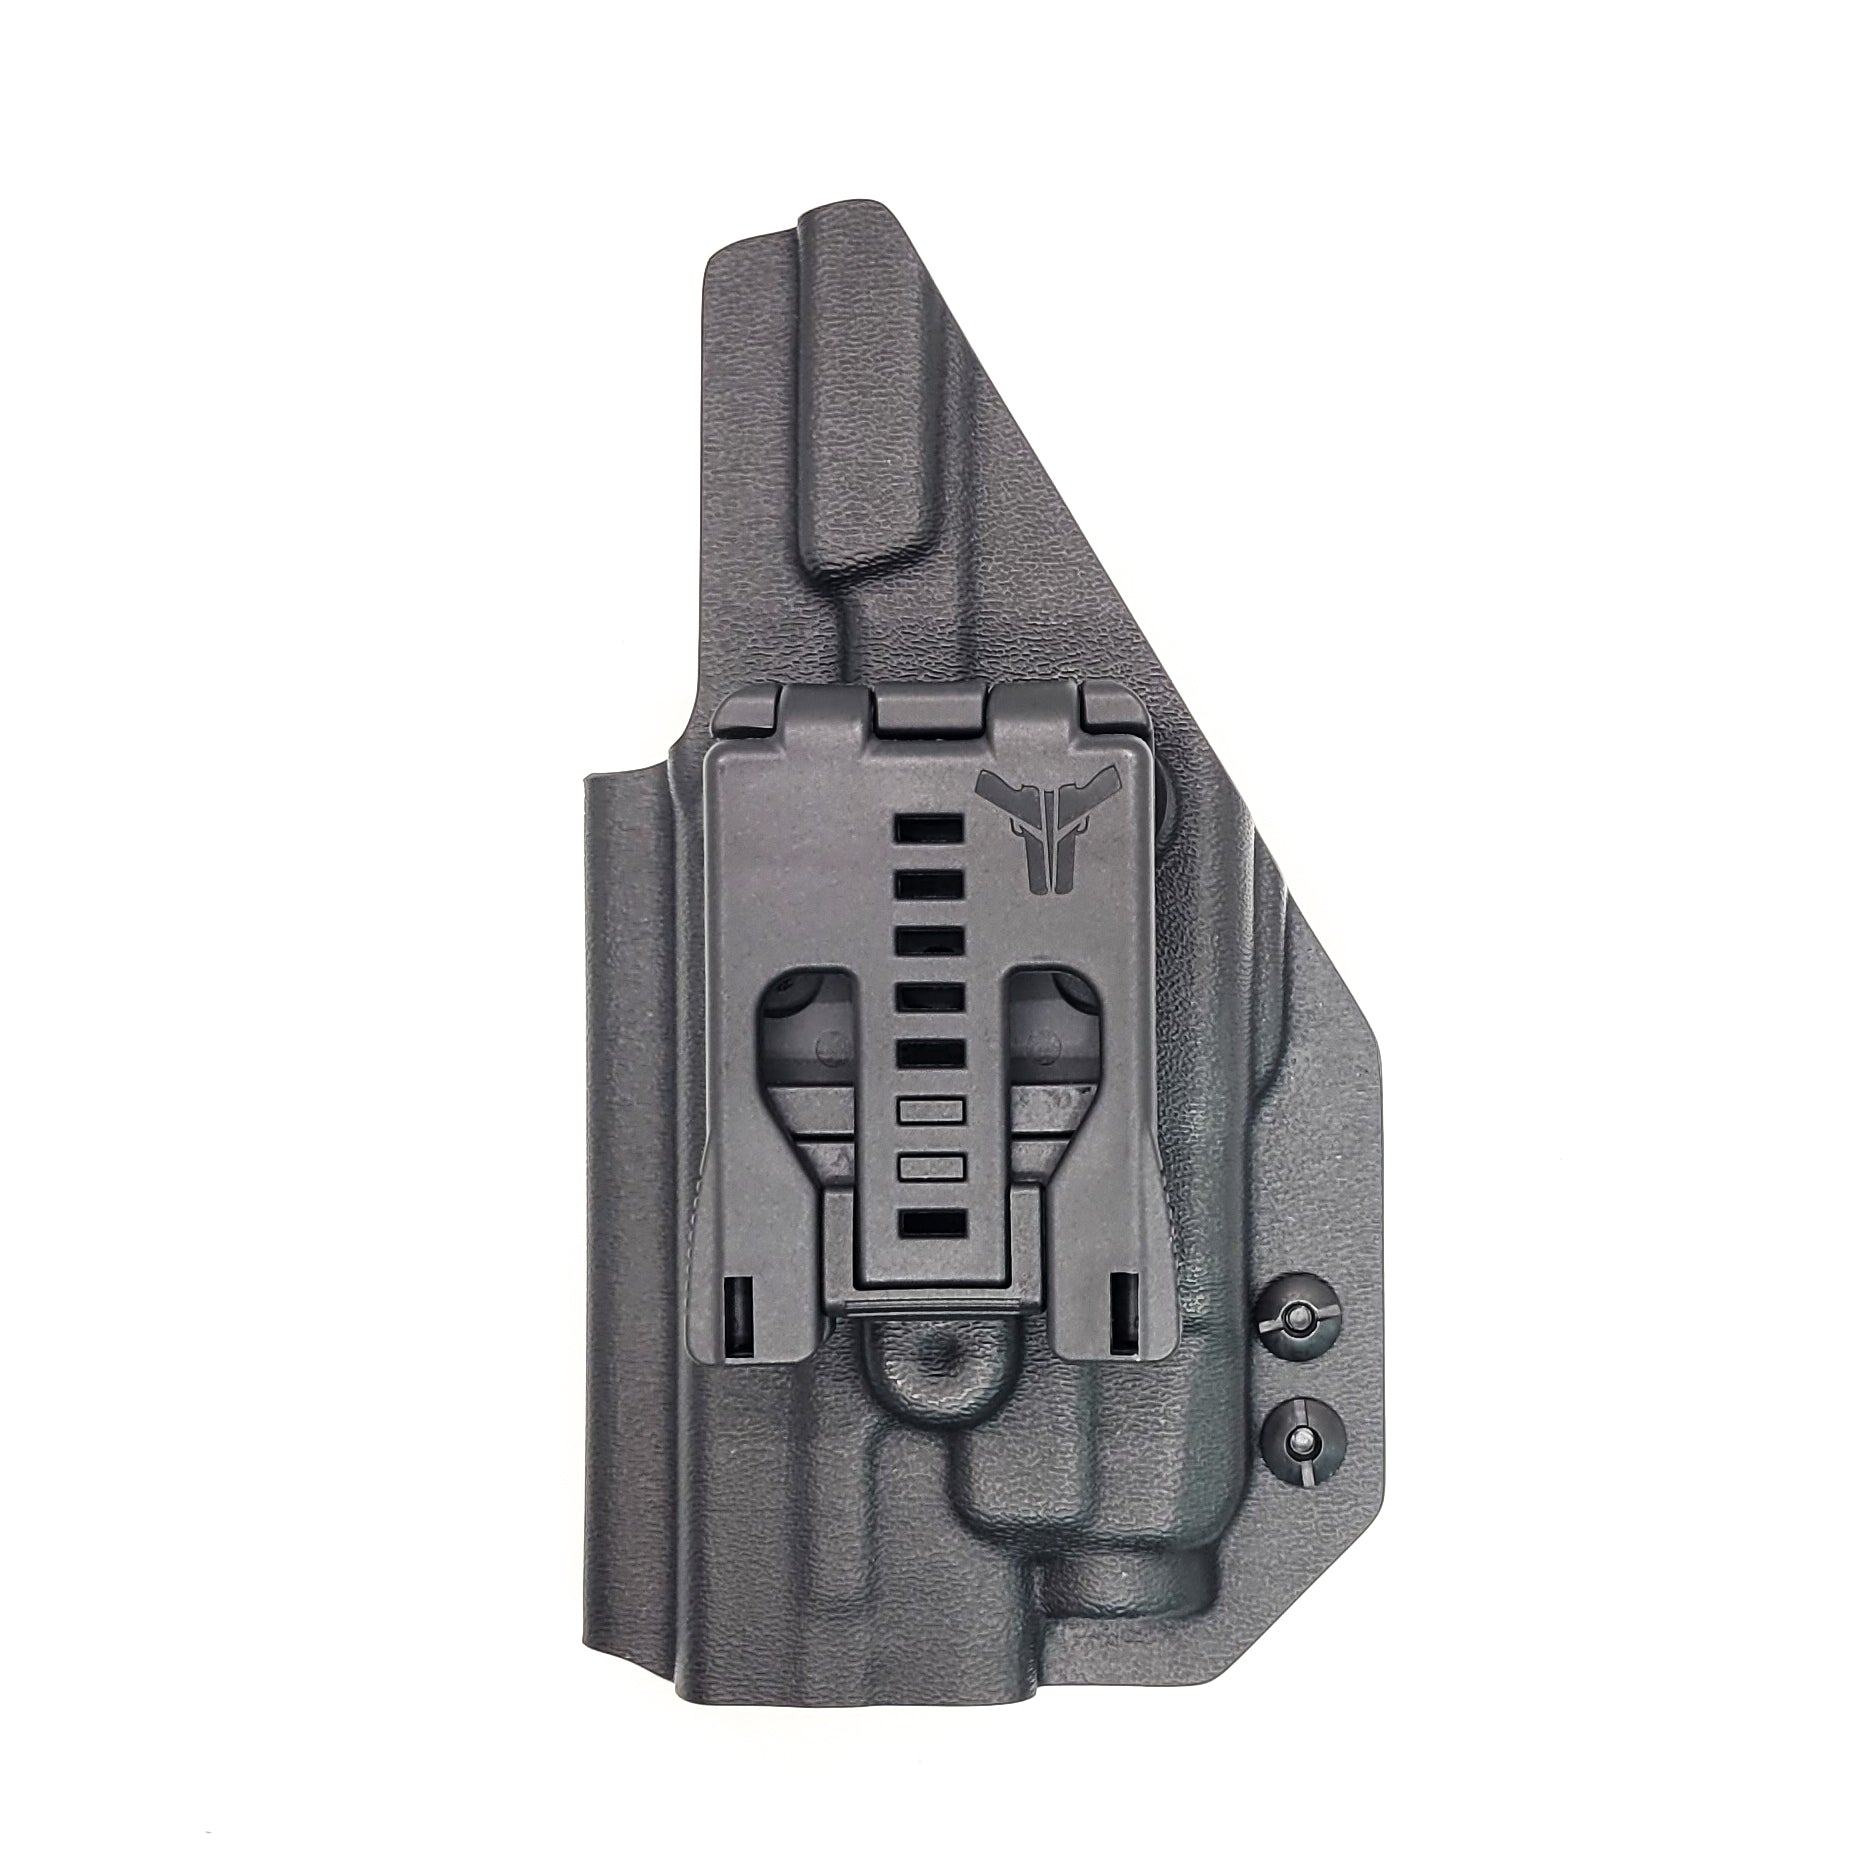 Best Outside Waistband OWB Kydex Holster designed to fit the Smith & Wesson M&P M2.0 9mm 4.25" & 4" pistols with the Streamlight TLR-7 or TLR-7A light mounted to the pistol. Full sweat guard, adjustable retention, minimal material, & smooth edges to reduce printing. Cleared for red dot sights. Made in the USA.